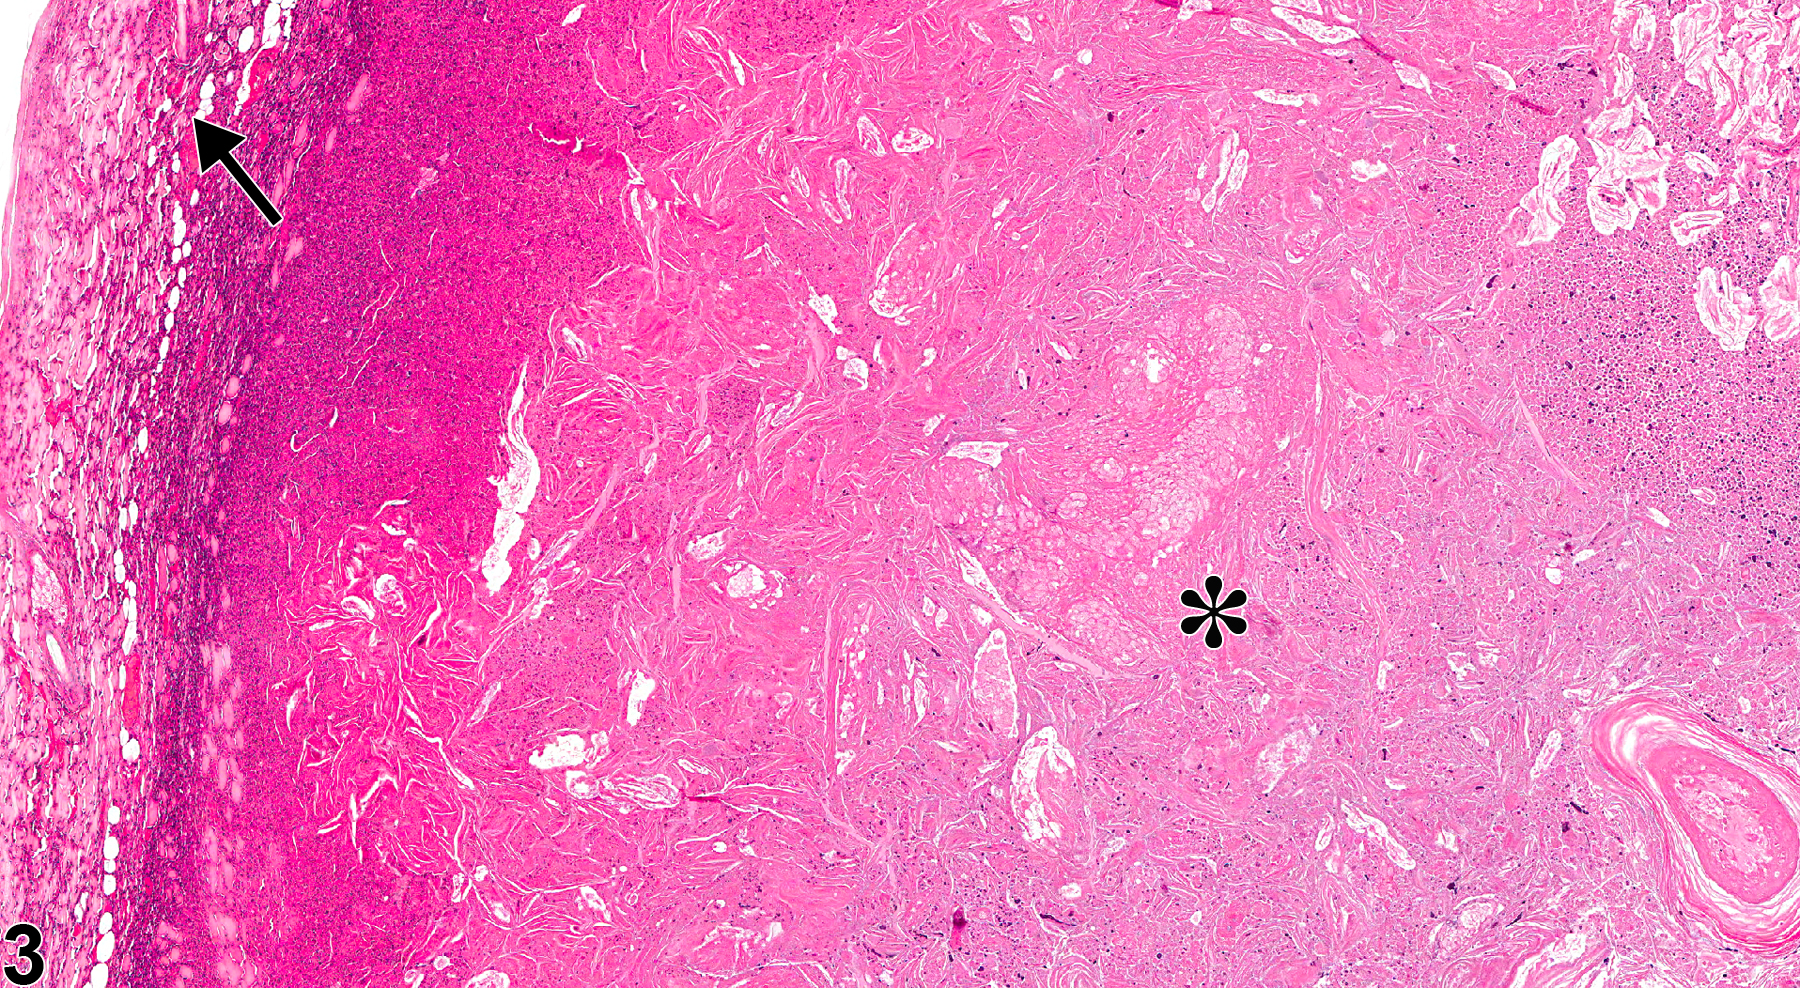 Image of inflammation in the Zymbal's gland from a male B6C3F1 mouse in a chronic study